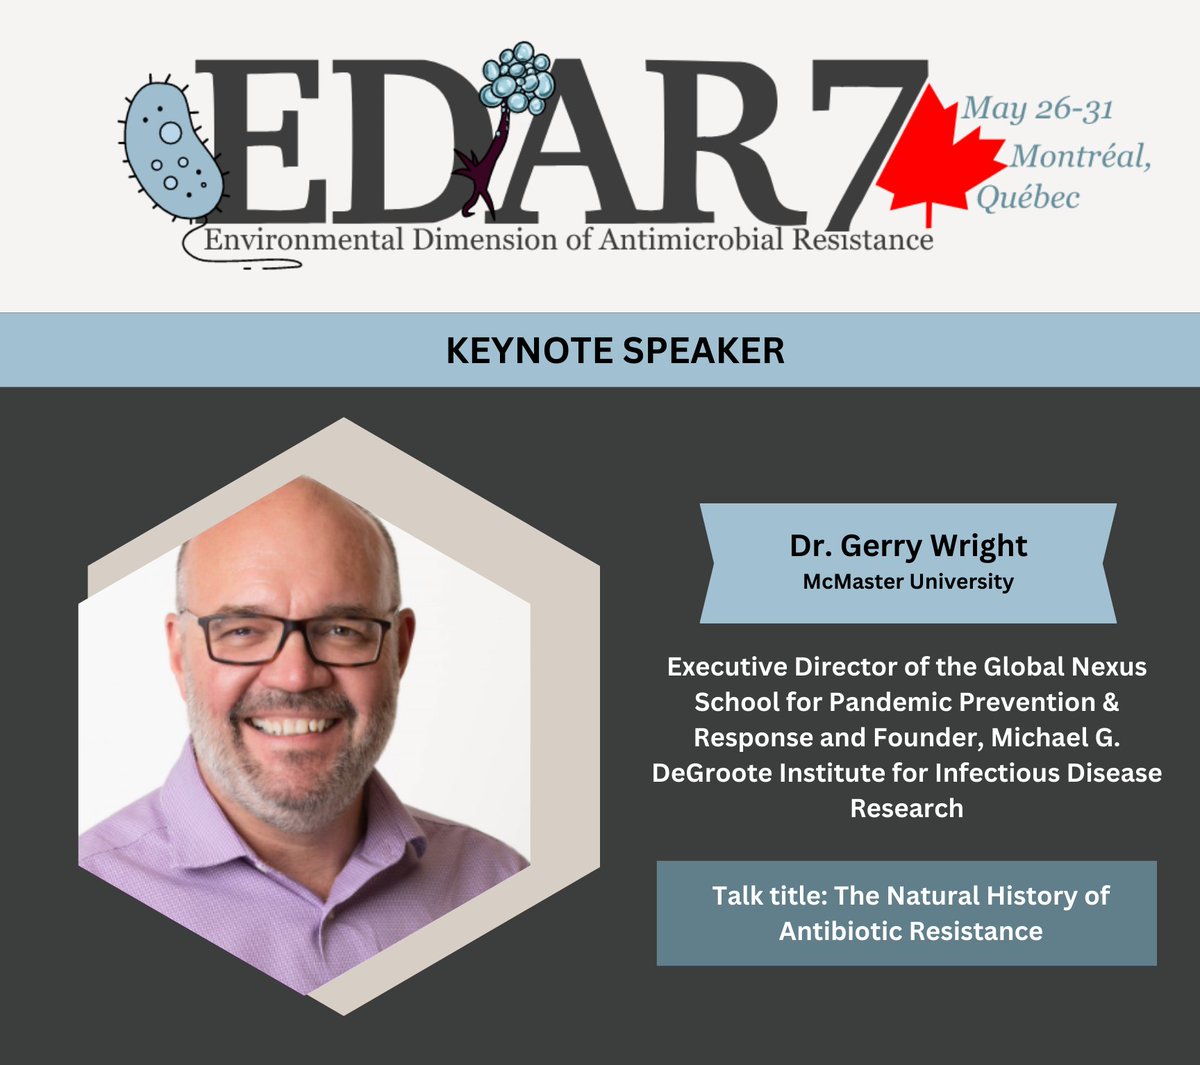 Join us in May to hear Dr. Gerry Wright's (@gerryiidr) fascinating talk titled, “The Natural History of Antibiotic Resistance” as he takes the stage as one of the two keynote speakers at #EDAR7. We are excited to announce his participation and hope you can join!